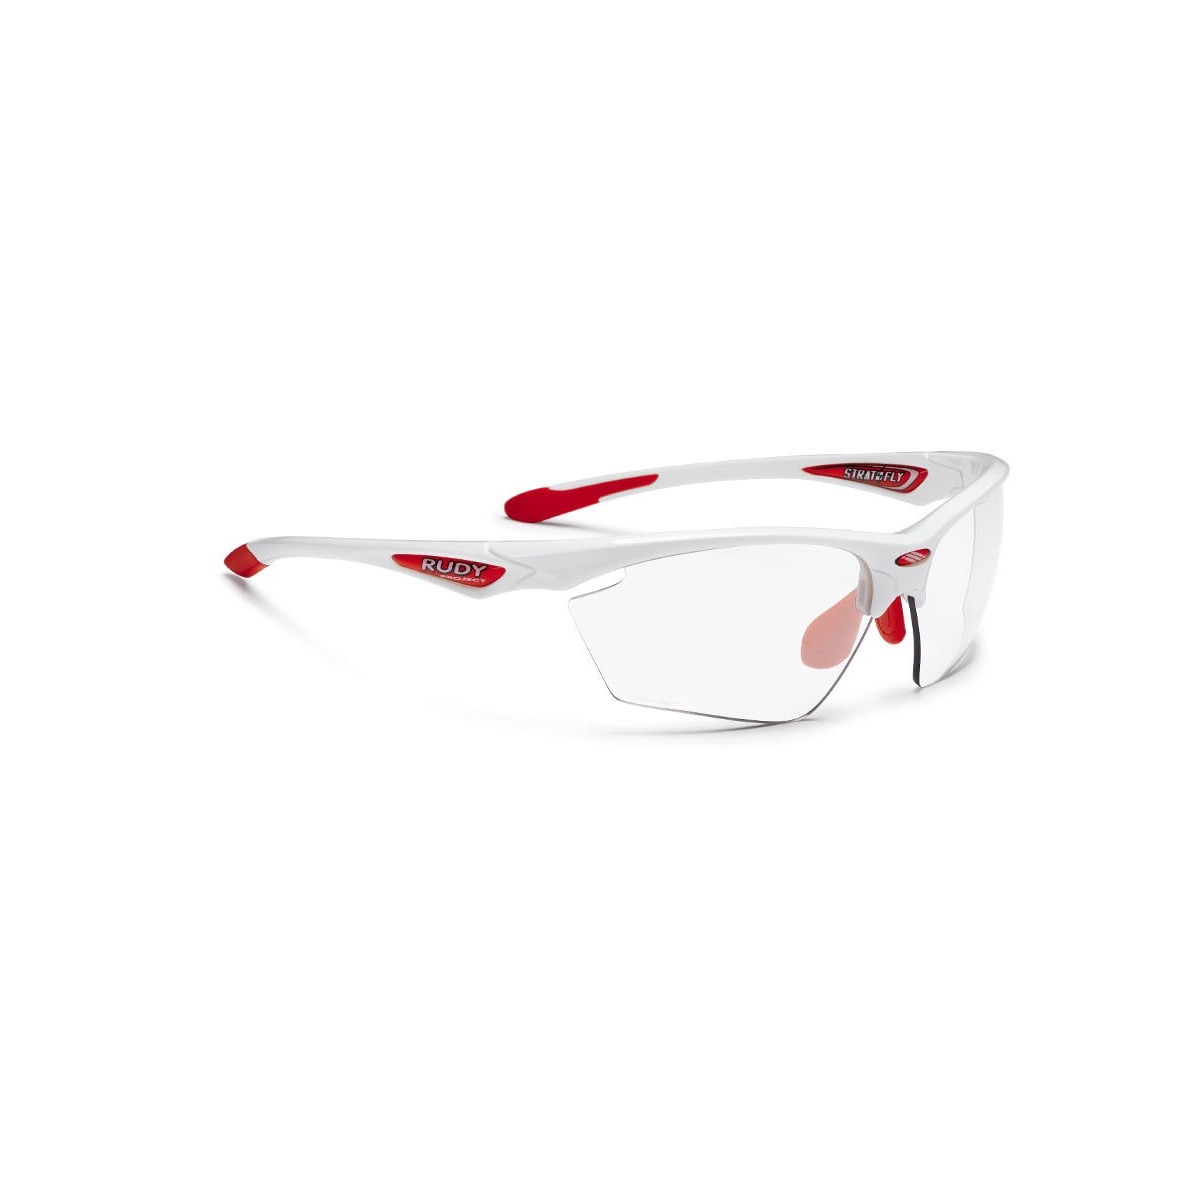 Glasses Stratofly White Gloss RPO Photoclear Rudy Project